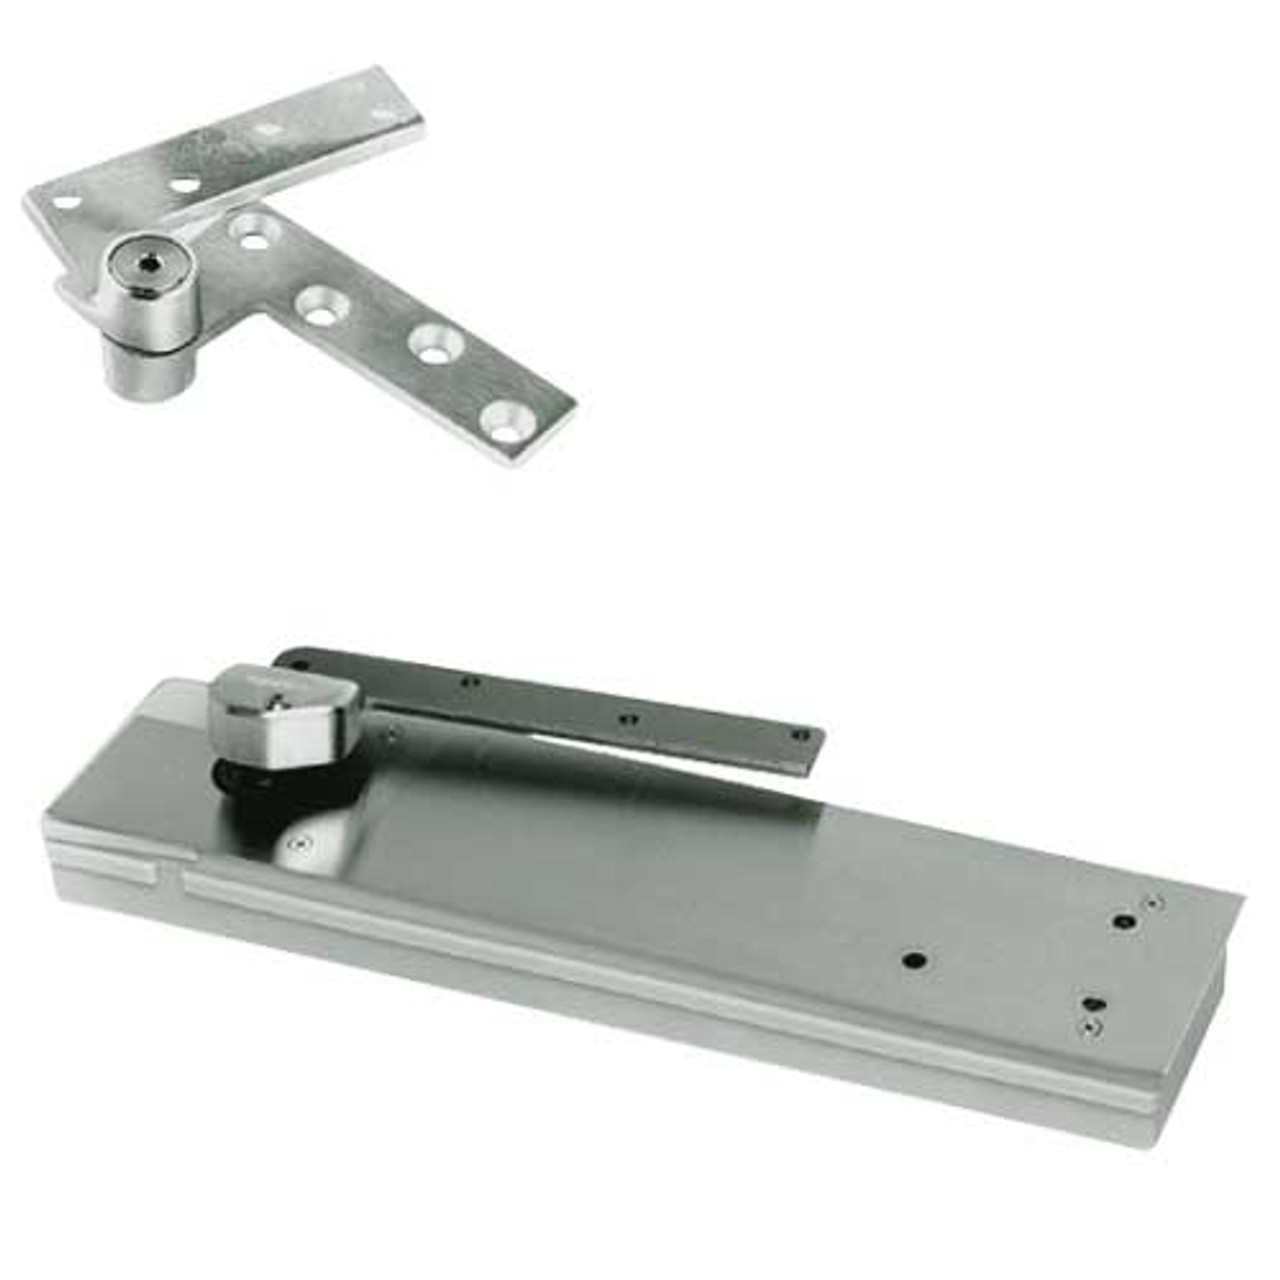 5103ABC180-1-1/2OS-LH-619 Rixson 51 Series 1-1/2" Offset Hung Shallow Depth Floor Closers in Satin Nickel Finish